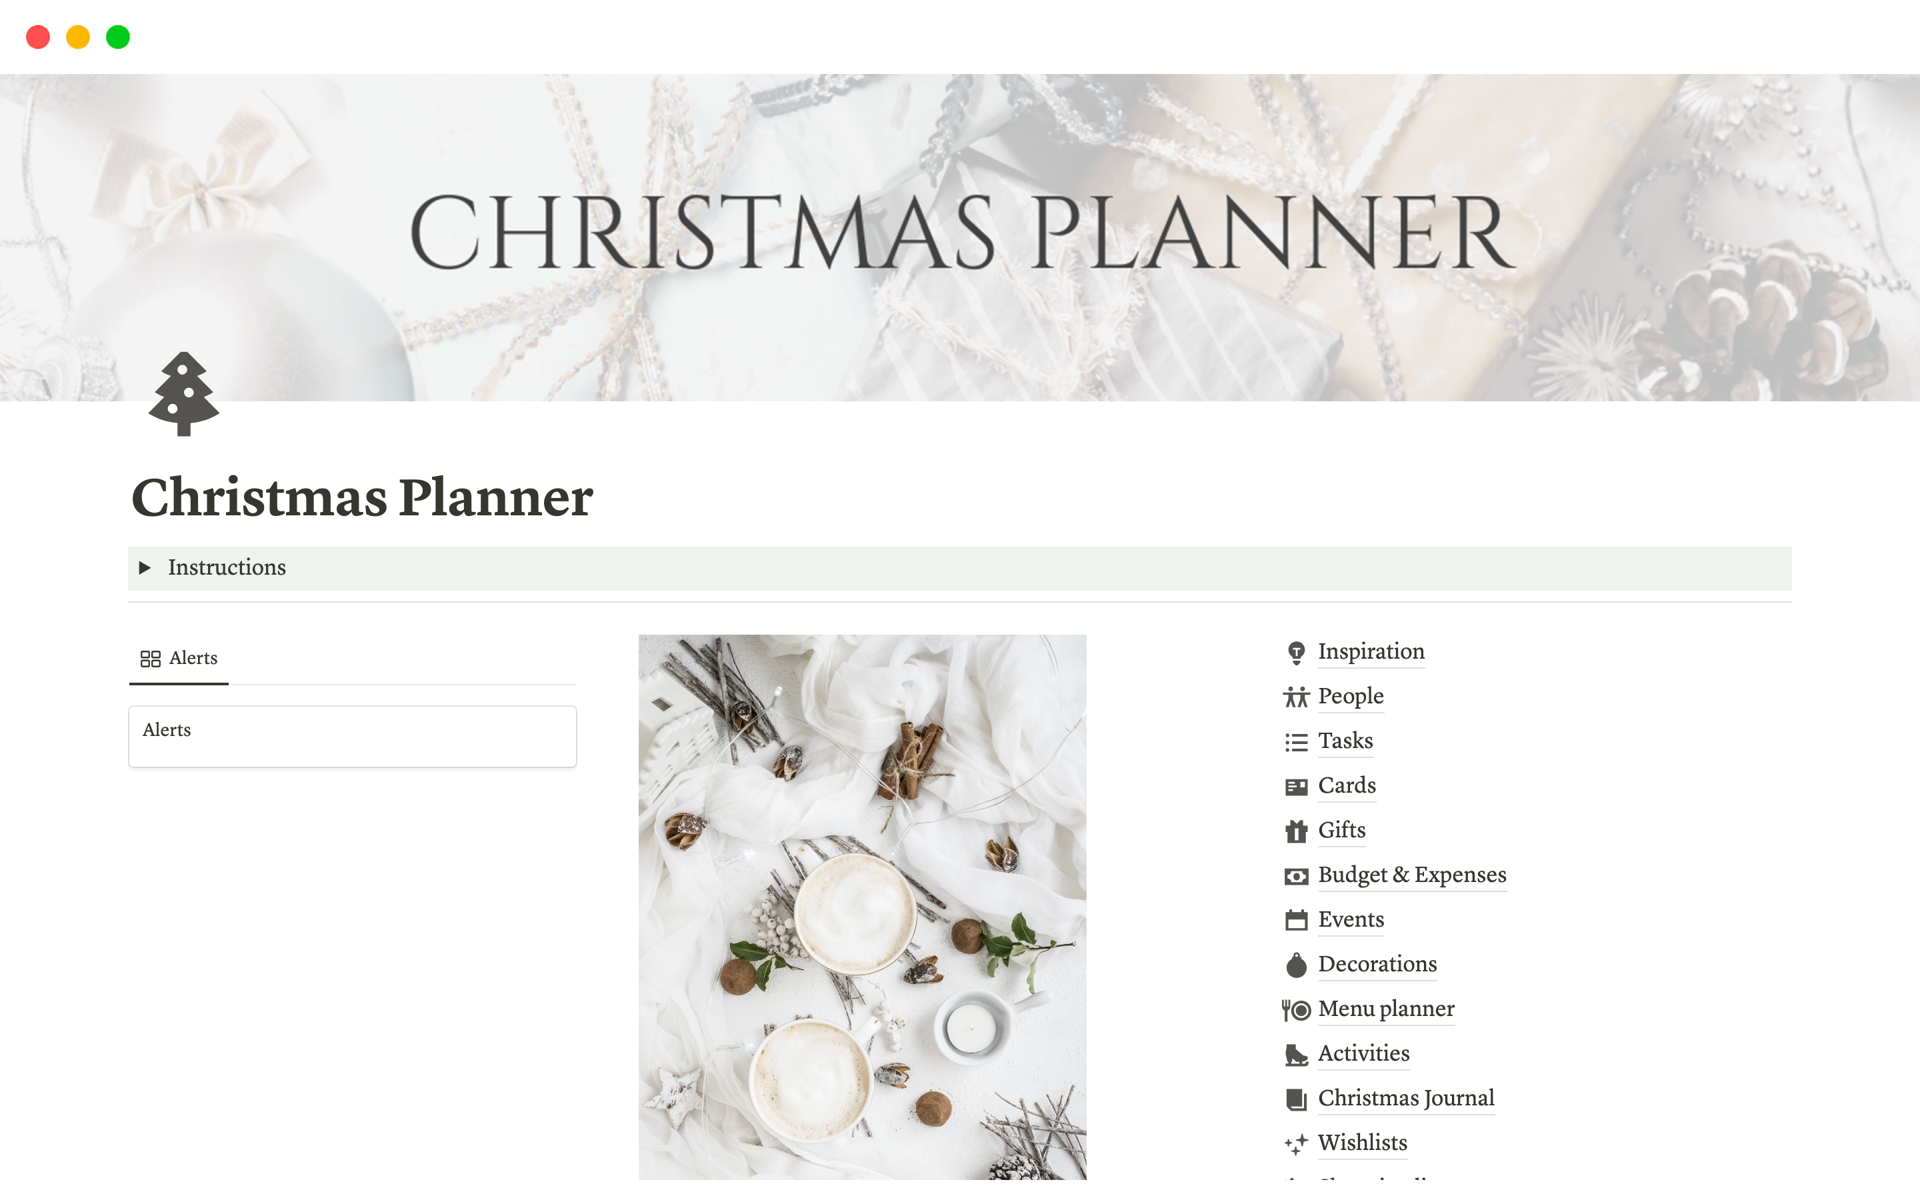 This Christmas planner is perfect for planning events during the Holidays, plan gifts, respect your budget, plan decorations and more. 